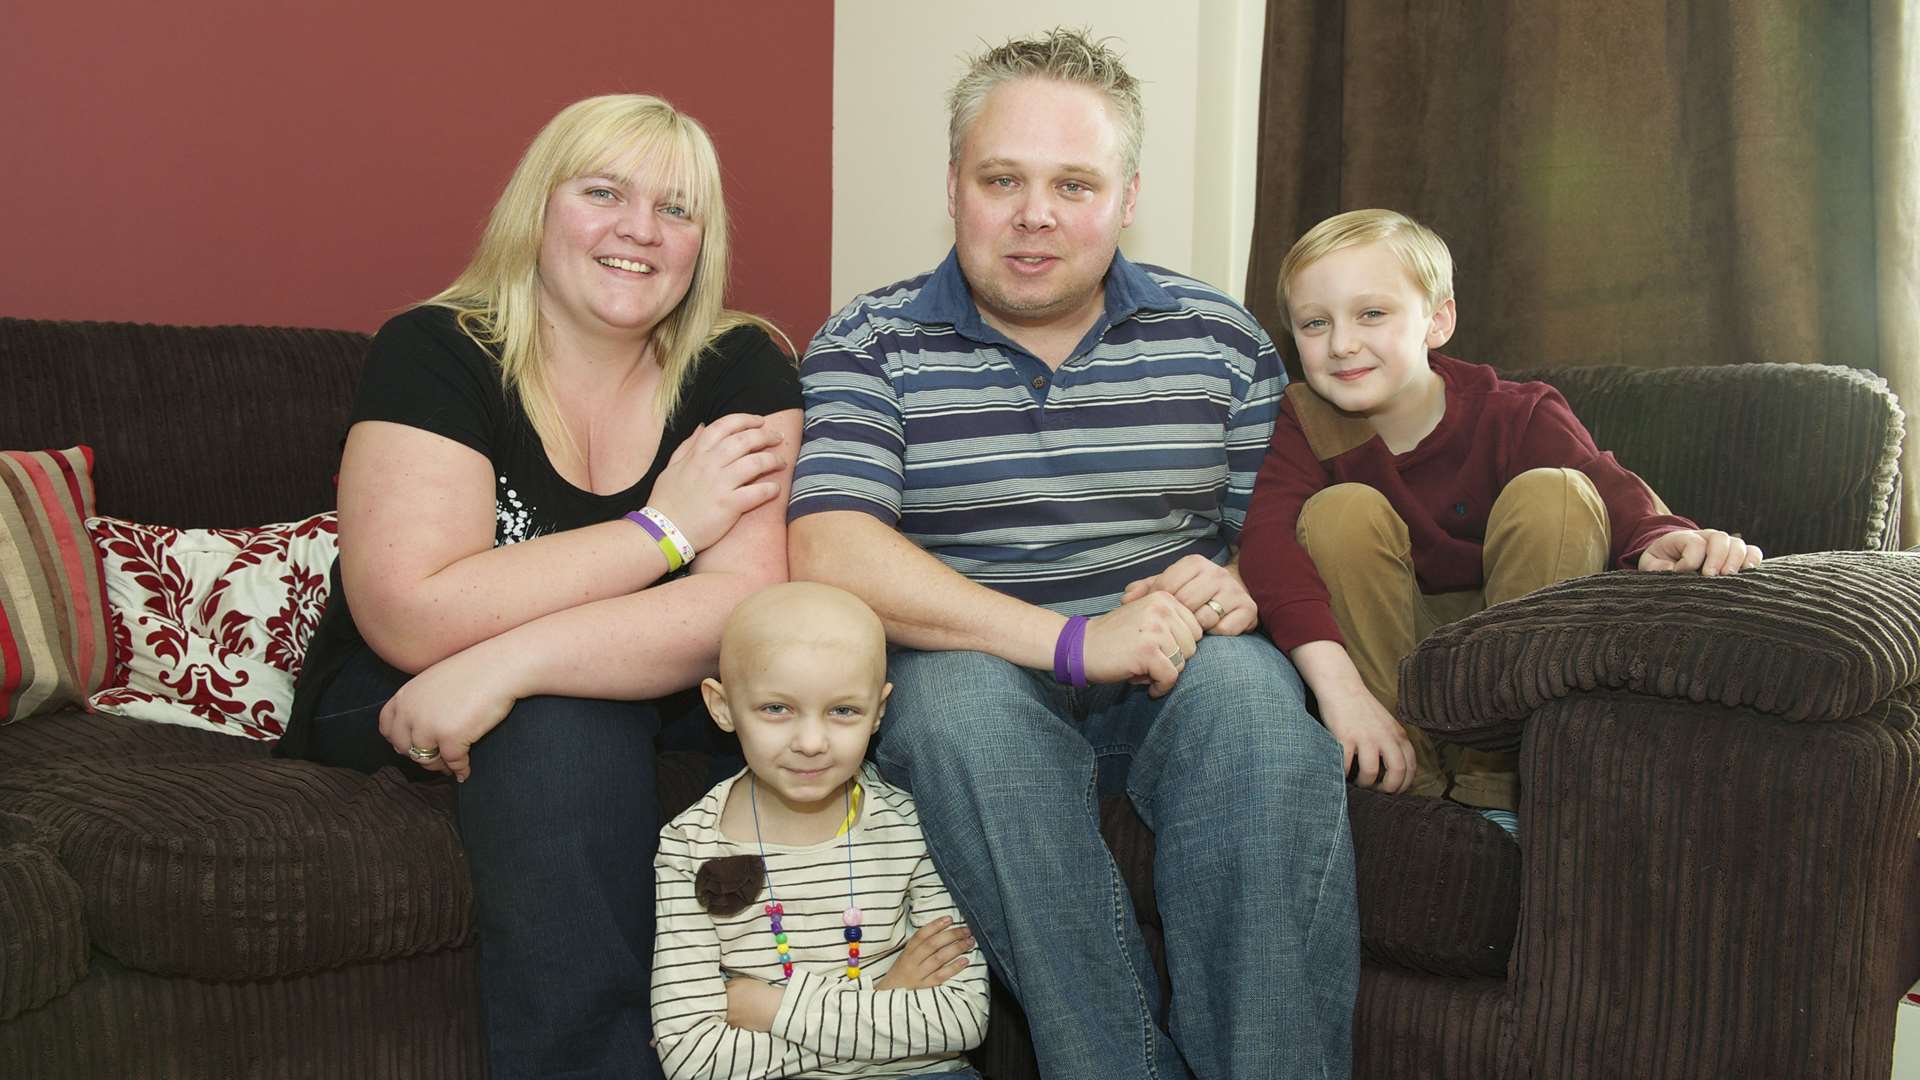 The Mowle family when they launched their appeal to help fund Stacey's treatment in the US